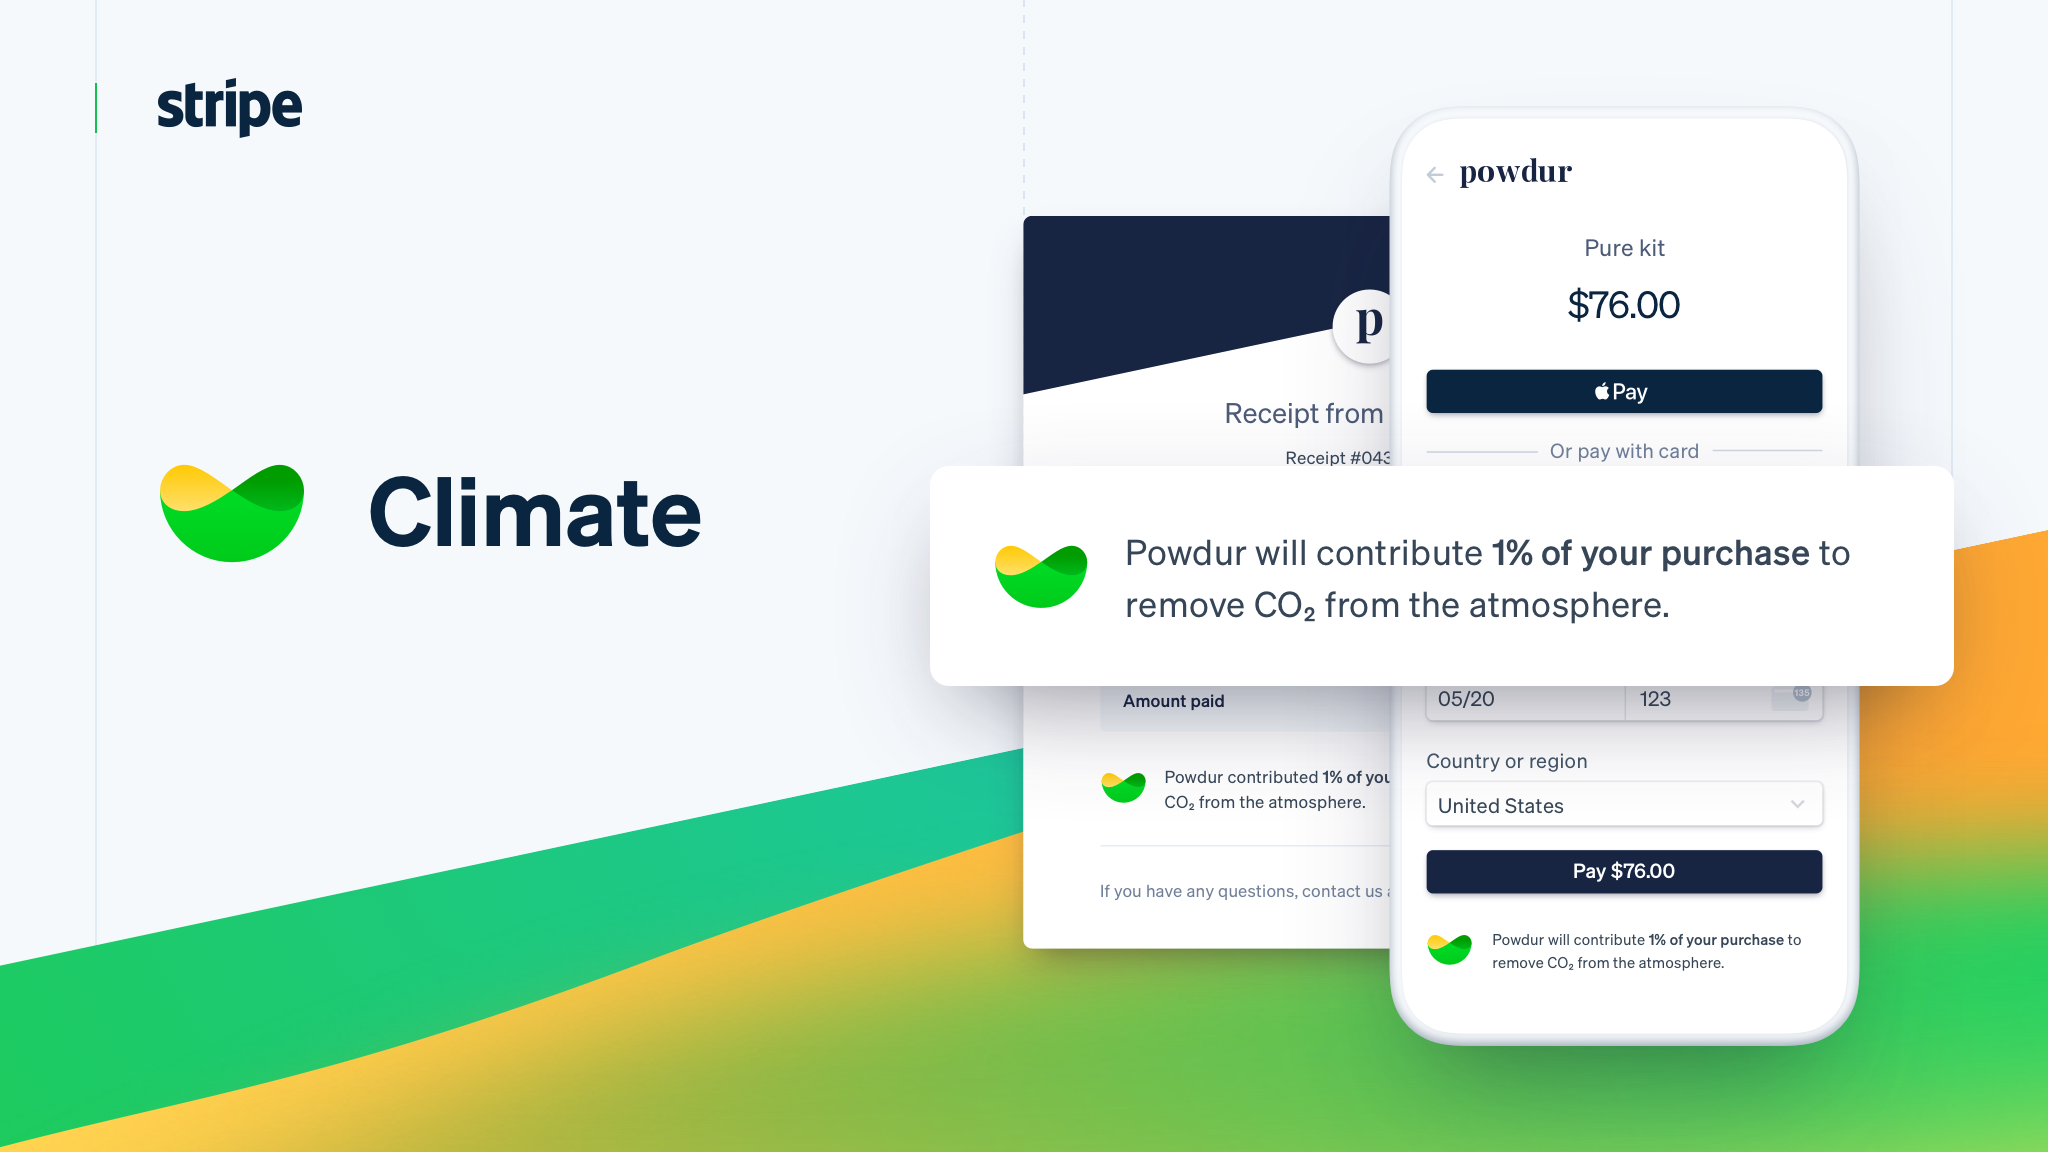 Carbon removal purchases with Stripe Climate tool